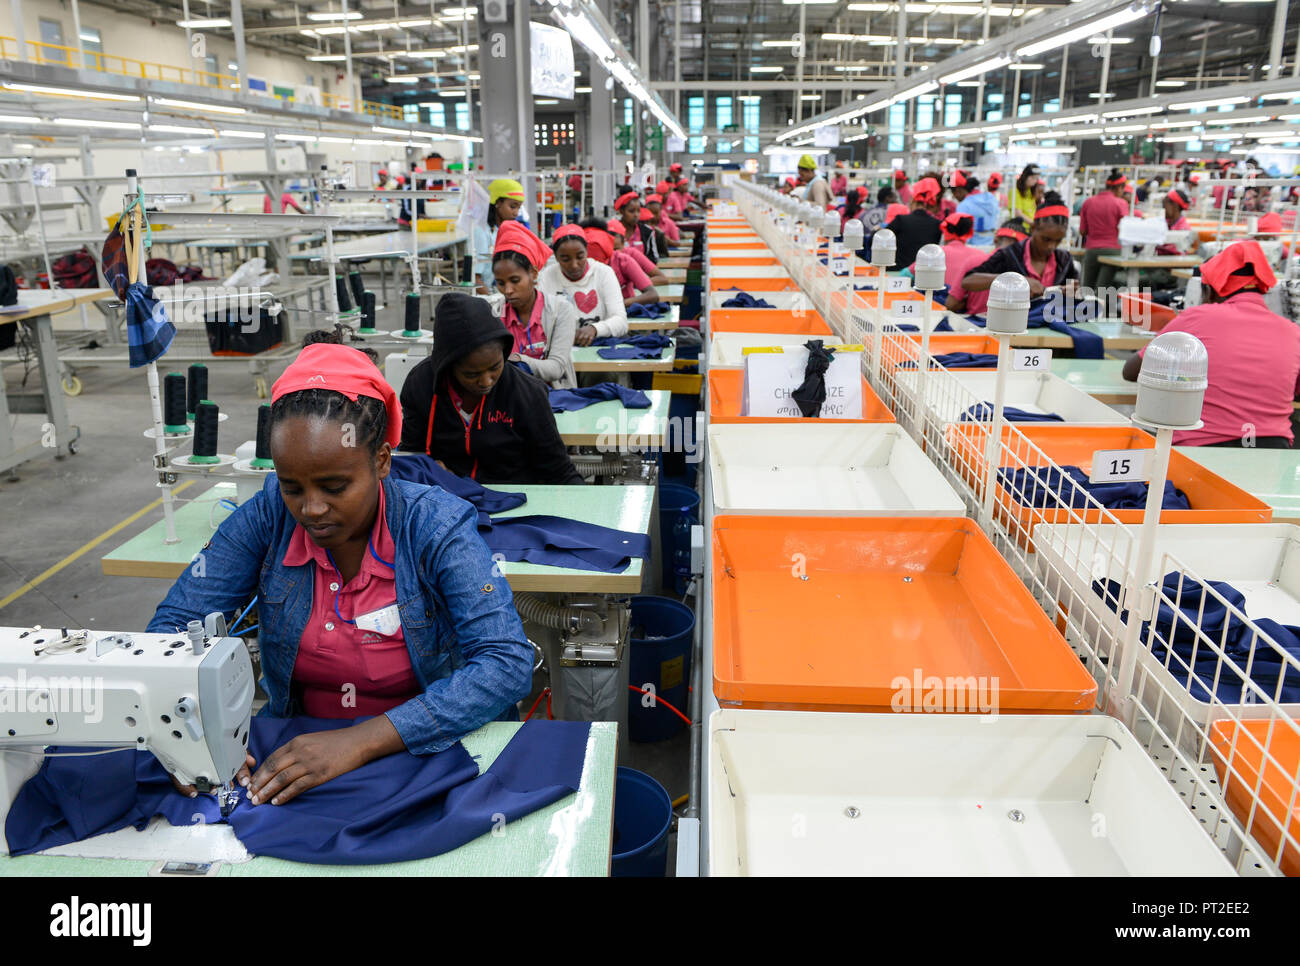 ETHIOPIA , Southern Nations, Hawassa or Awasa, Hawassa Industrial Park, chinese-built for the ethiopian government to attract foreign investors with low rent and tax free to establish a textile industry and create thousands of new jobs, taiwanese company Everest Textile Co. Ltd.produces textiles from synthetic fabric for export / AETHIOPIEN, Hawassa, Industriepark, gebaut durch chinesische Firmen fuer die ethiopische Regierung um die Hallen fuer Textilbetriebe von Investoren zu vermieten, taiwanesische Firma Everest Textile Co. Ltd. produziert Textilien aus synthetischen Stoffen fuer den Expor Stock Photo